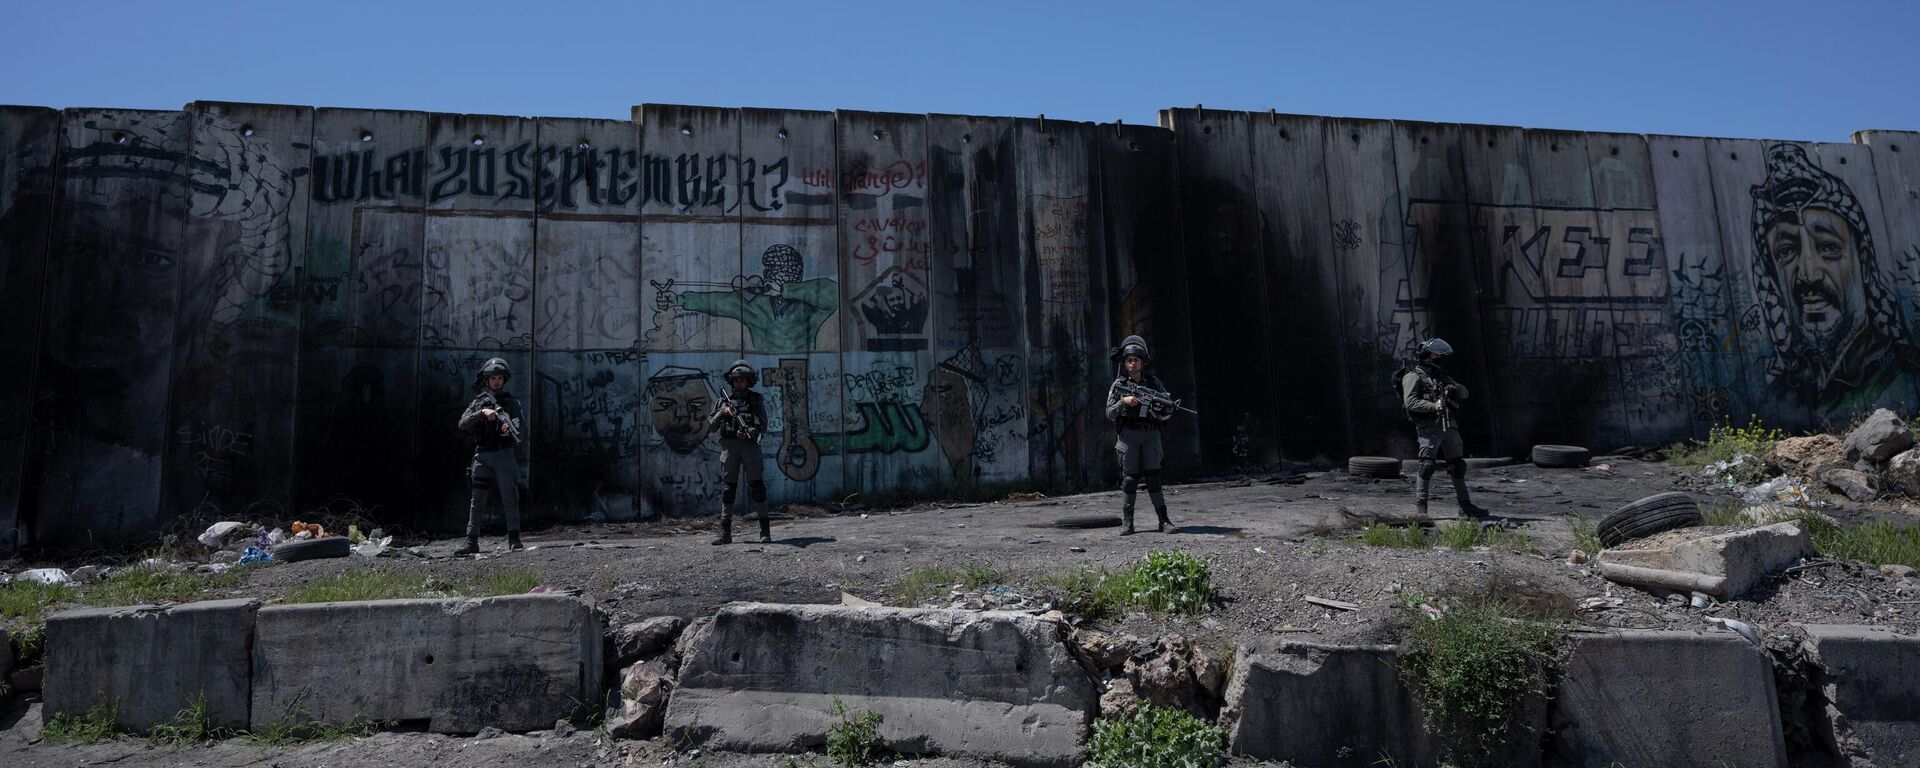 Israeli Border Police secure the parameter of the closed Israeli Army Qalandia checkpoint, used by Palestinians to cross from the West Bank into Jerusalem, near the West Bank city of Ramallah, Friday, April 15, 2022. - Sputnik International, 1920, 19.11.2023